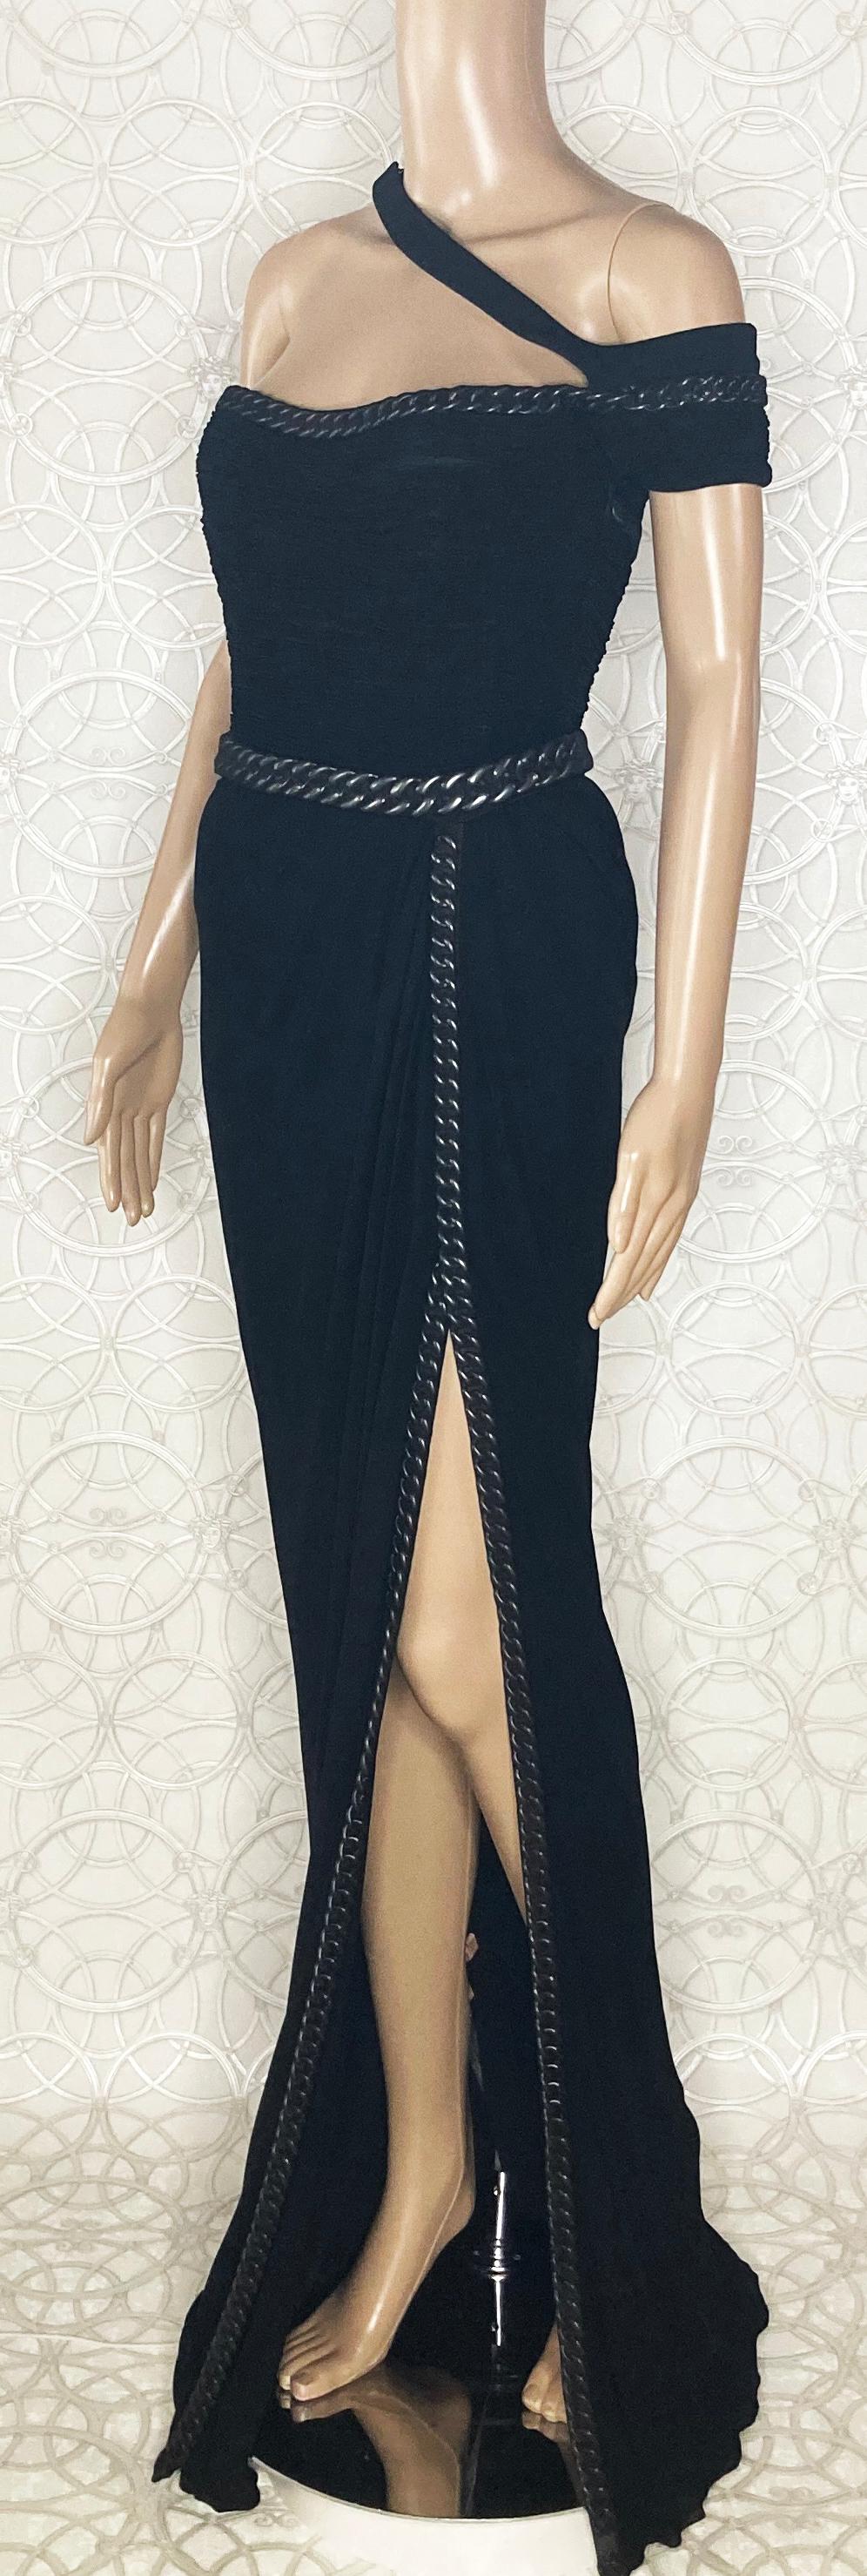 F/W 2007 Look #44 NEW VERSACE CHAIN EMBELLISHED LONG BLACK DRESS GOWN 40 - 4 For Sale 3